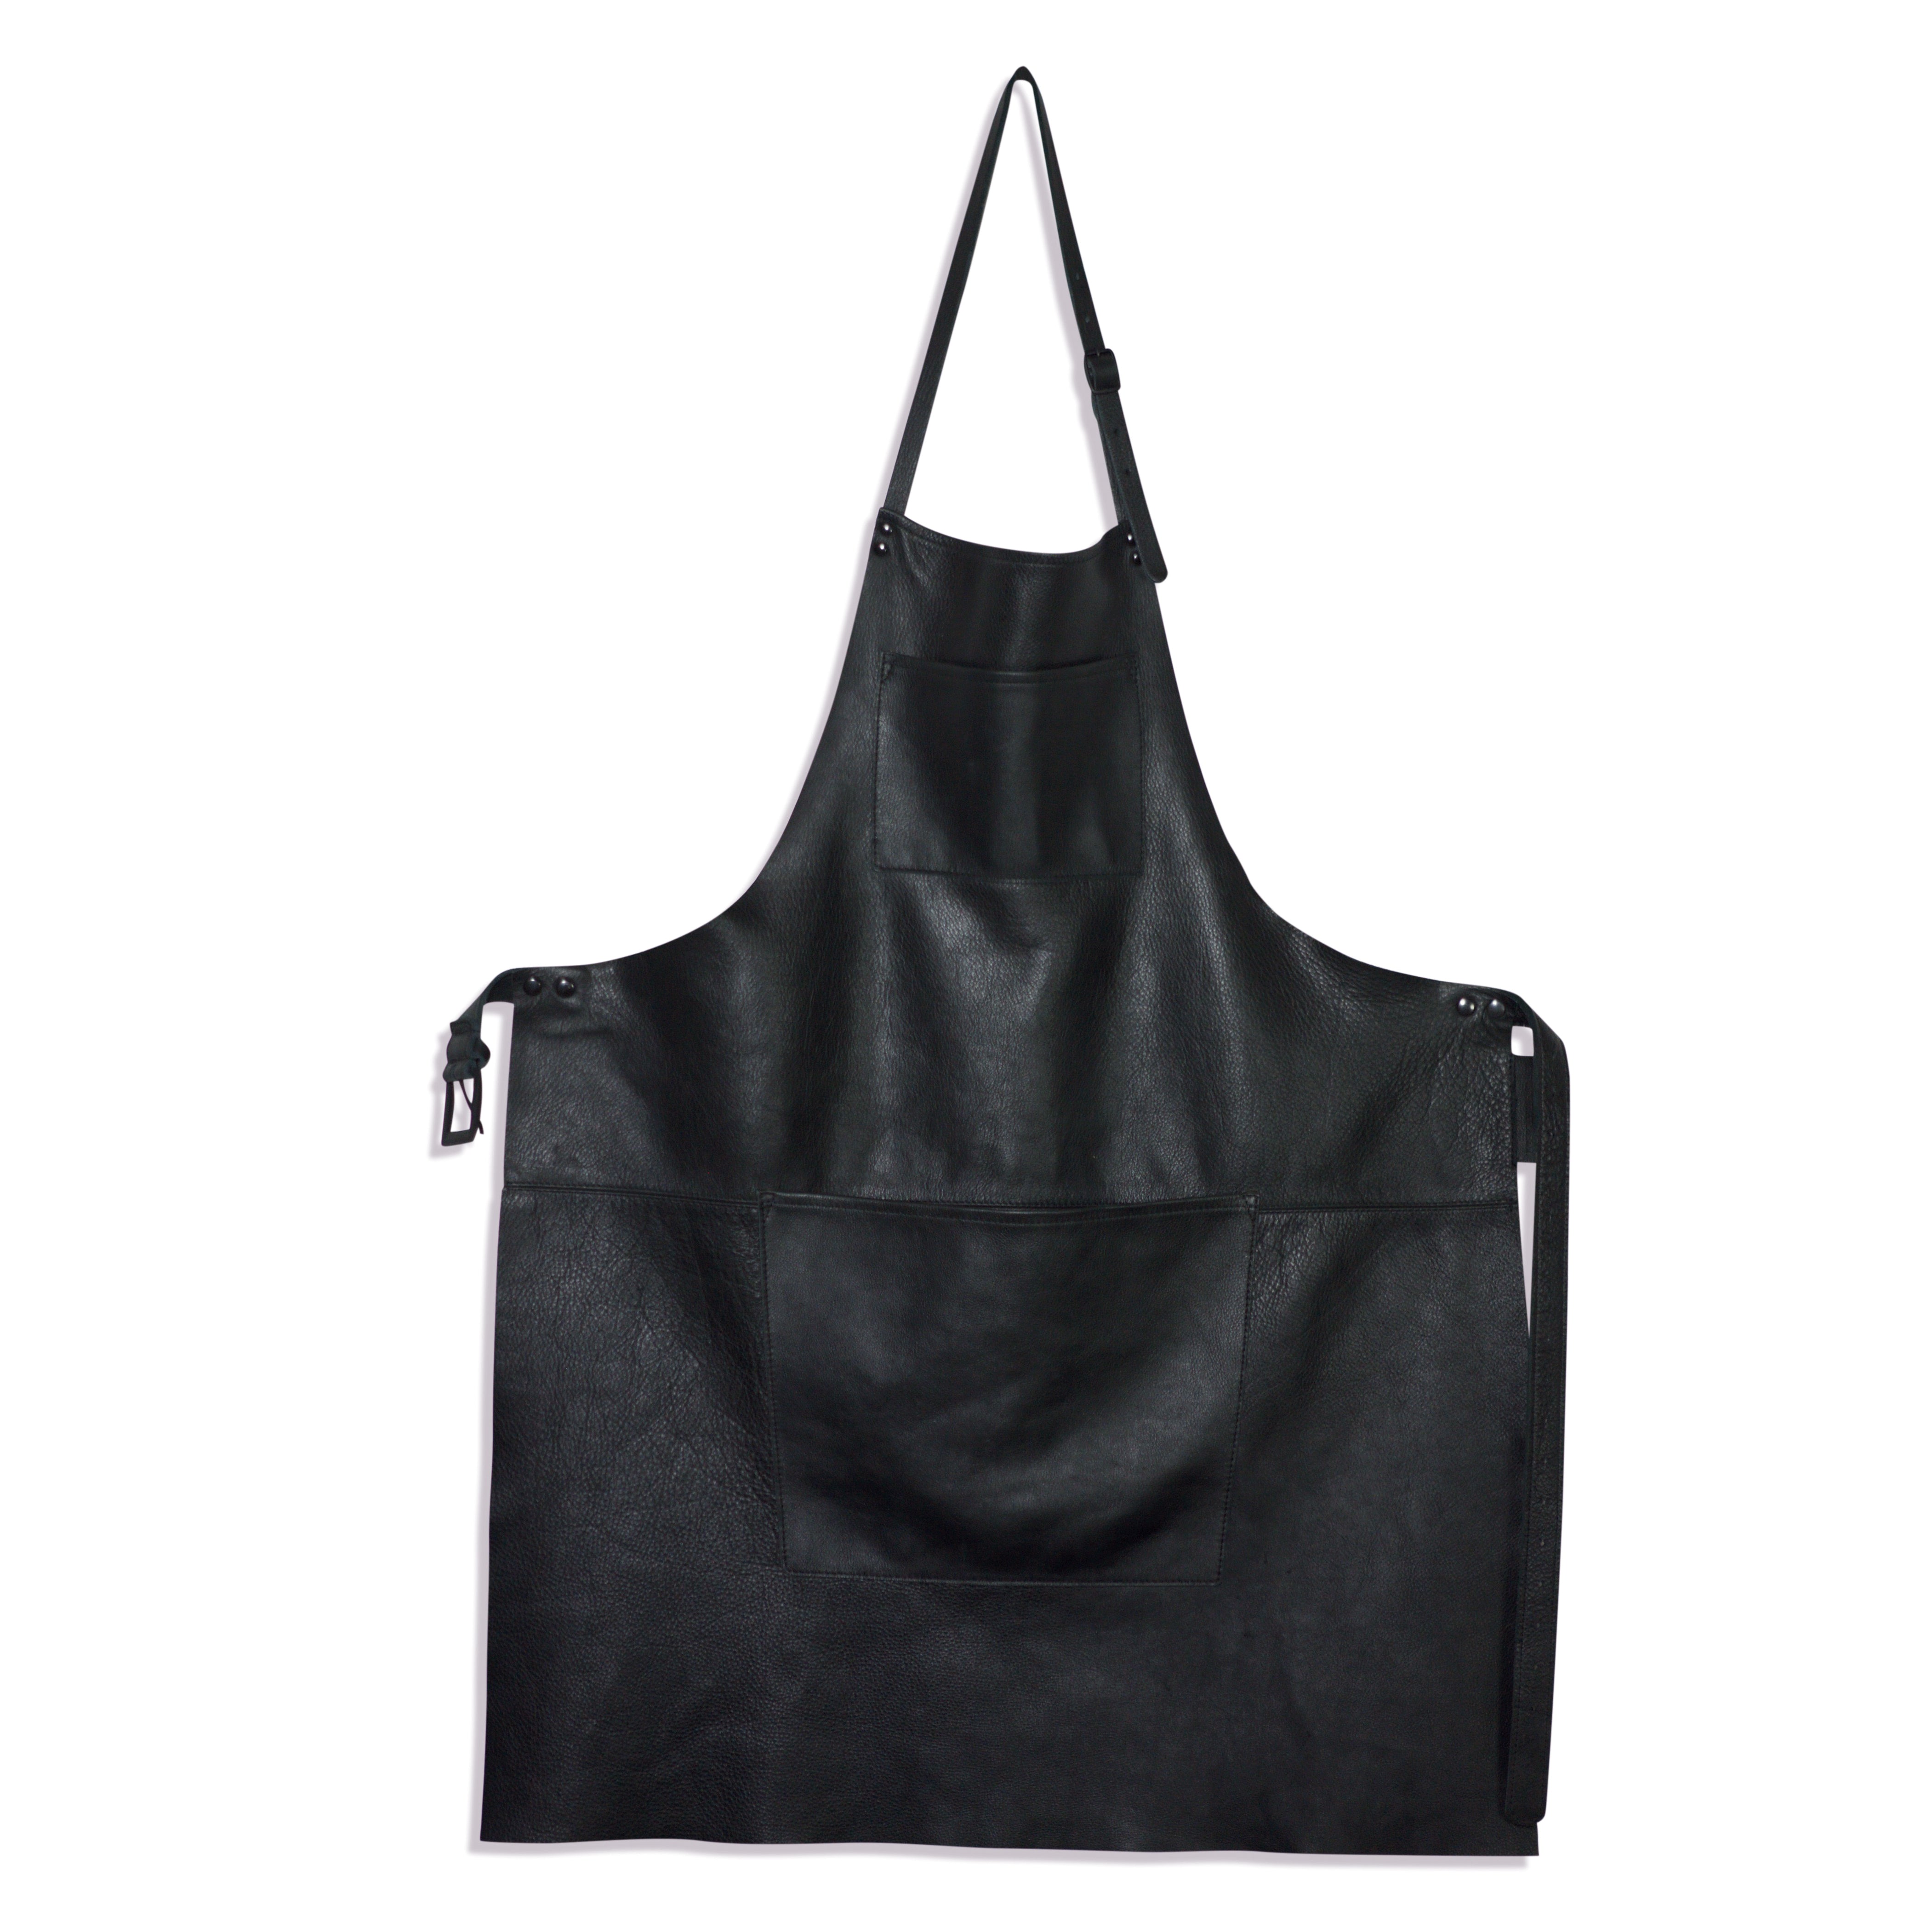 Dutchdeluxes Full Length Coated Black Apron Leather "Professional Apron" - apron - Dutchdeluxes - Aprons - Brand_Dutchdeluxes - Dutchdeluxes - Fathers Day - KTFWHS - Leather - Textiles_Aprons - DDLP-A-BL